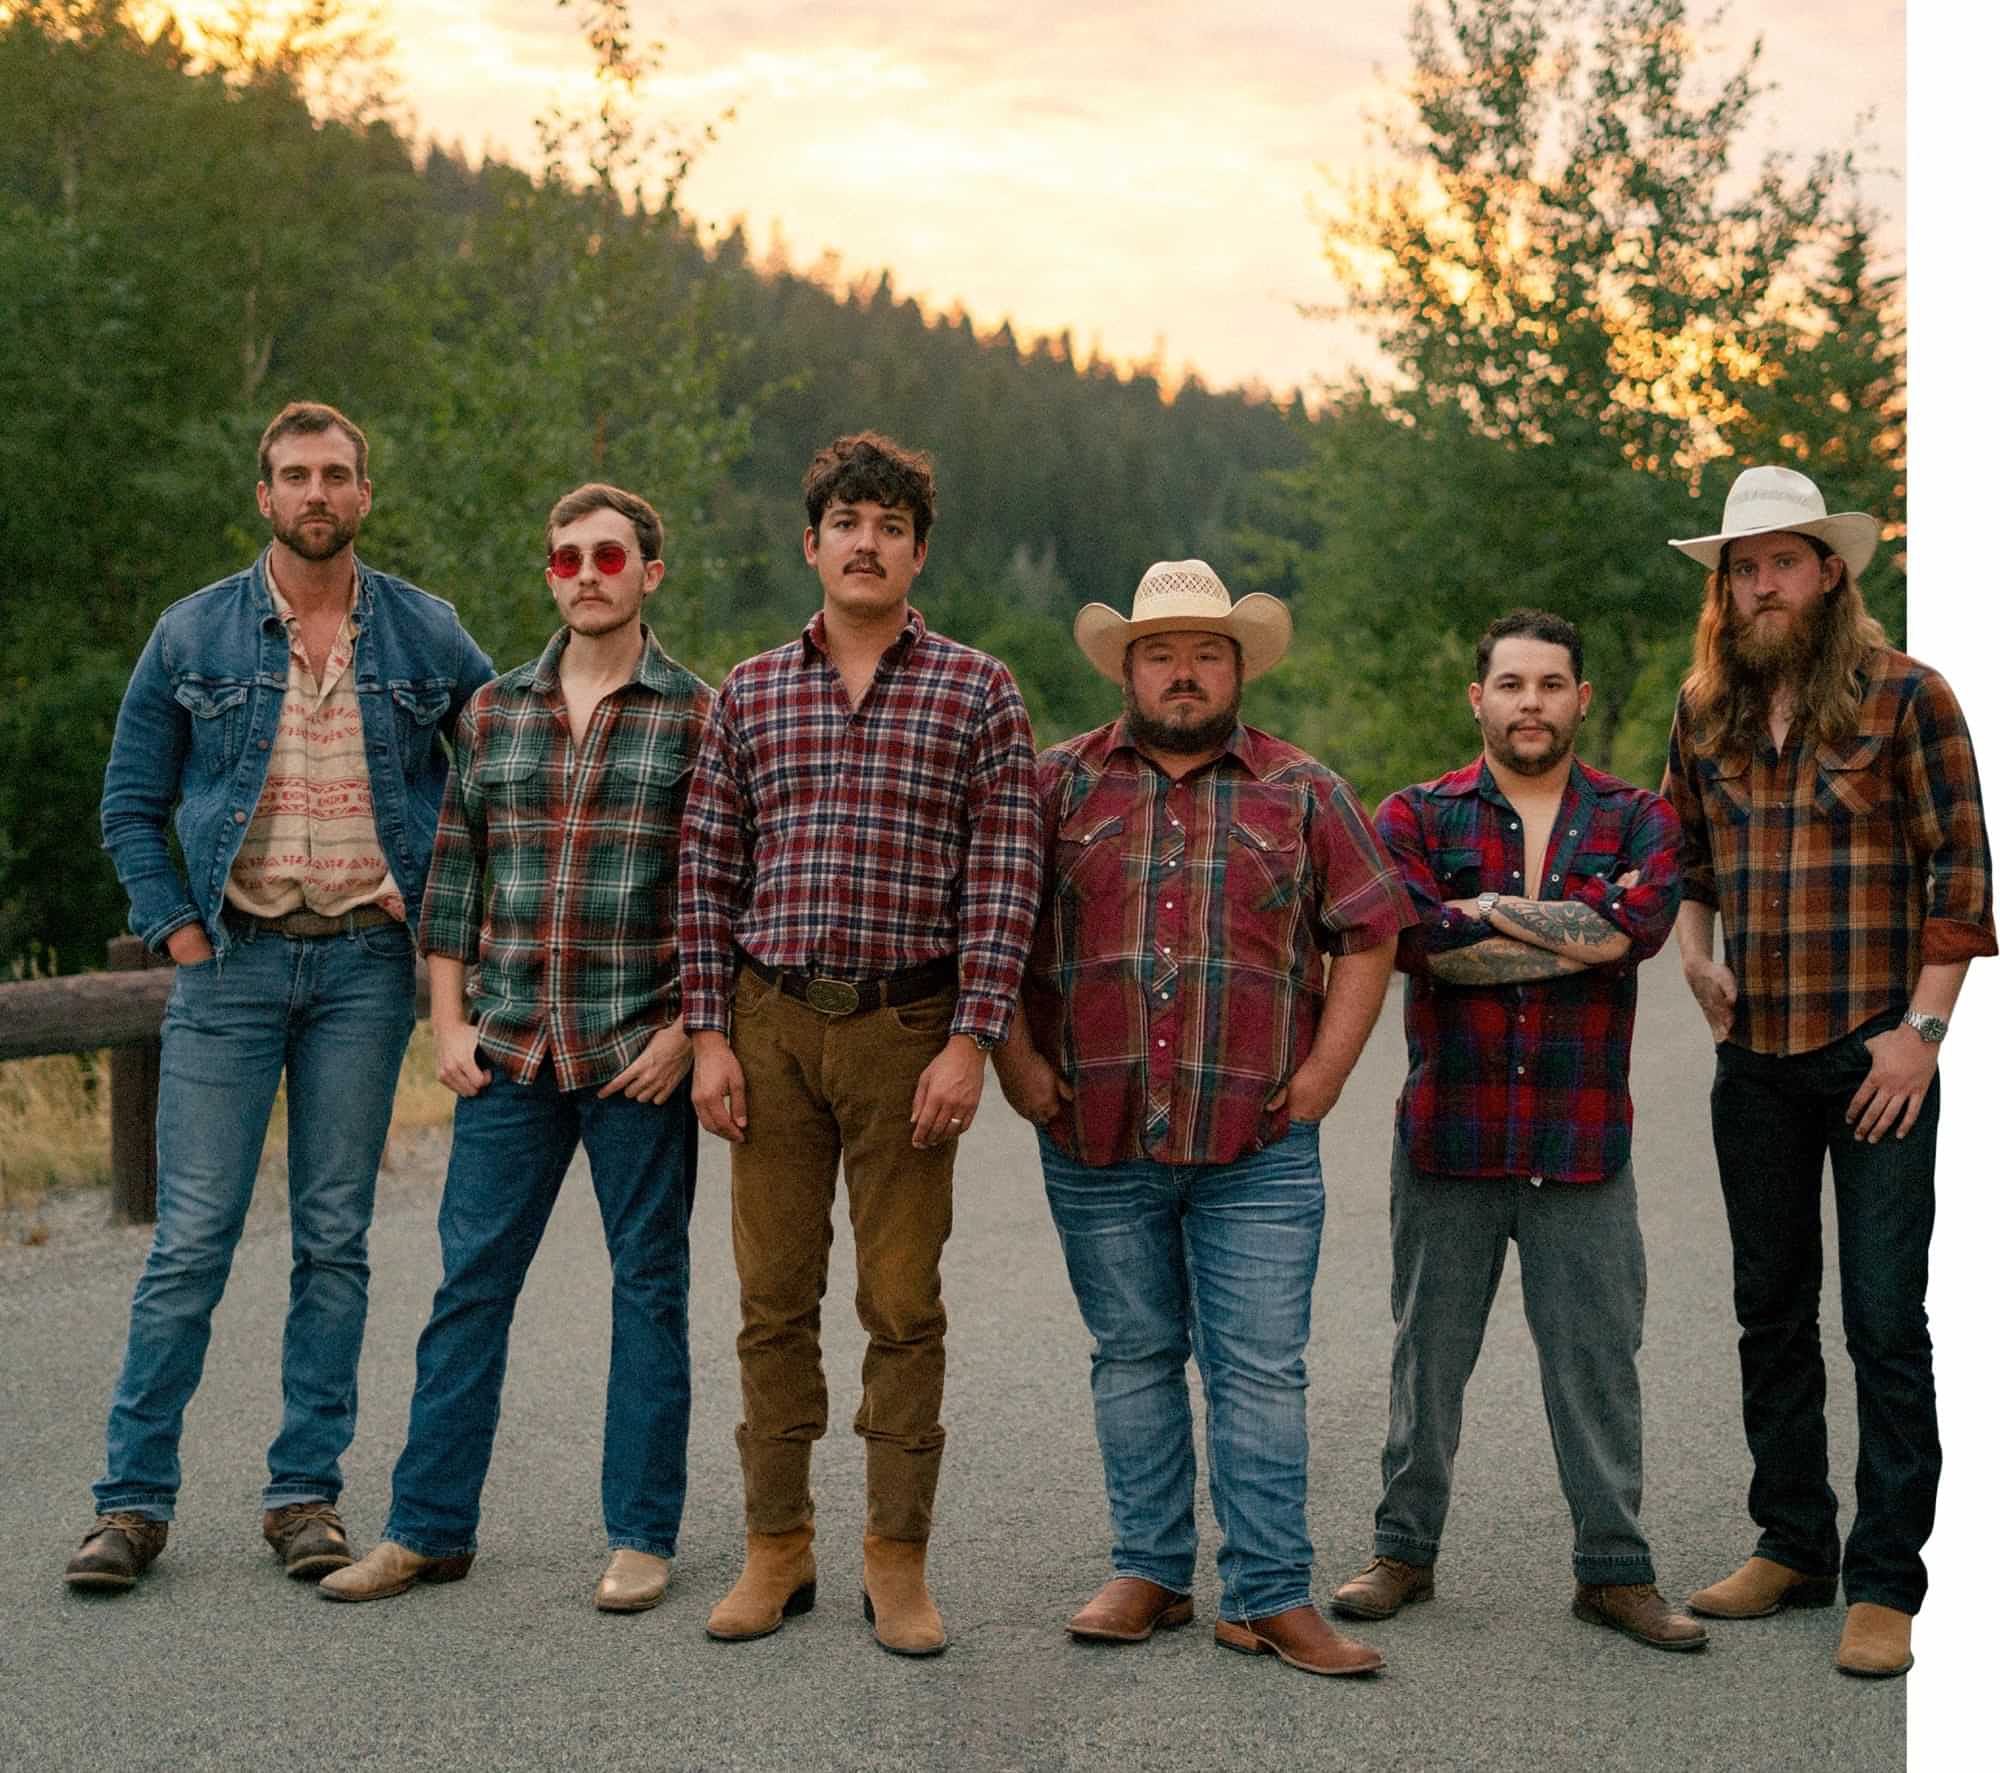 Jason Albers (far left) picture with his five bandmates, each wearing a different colored flannel shirt as they stand shoulder to shoulder on a road against the sun setting behind a high hill in the background